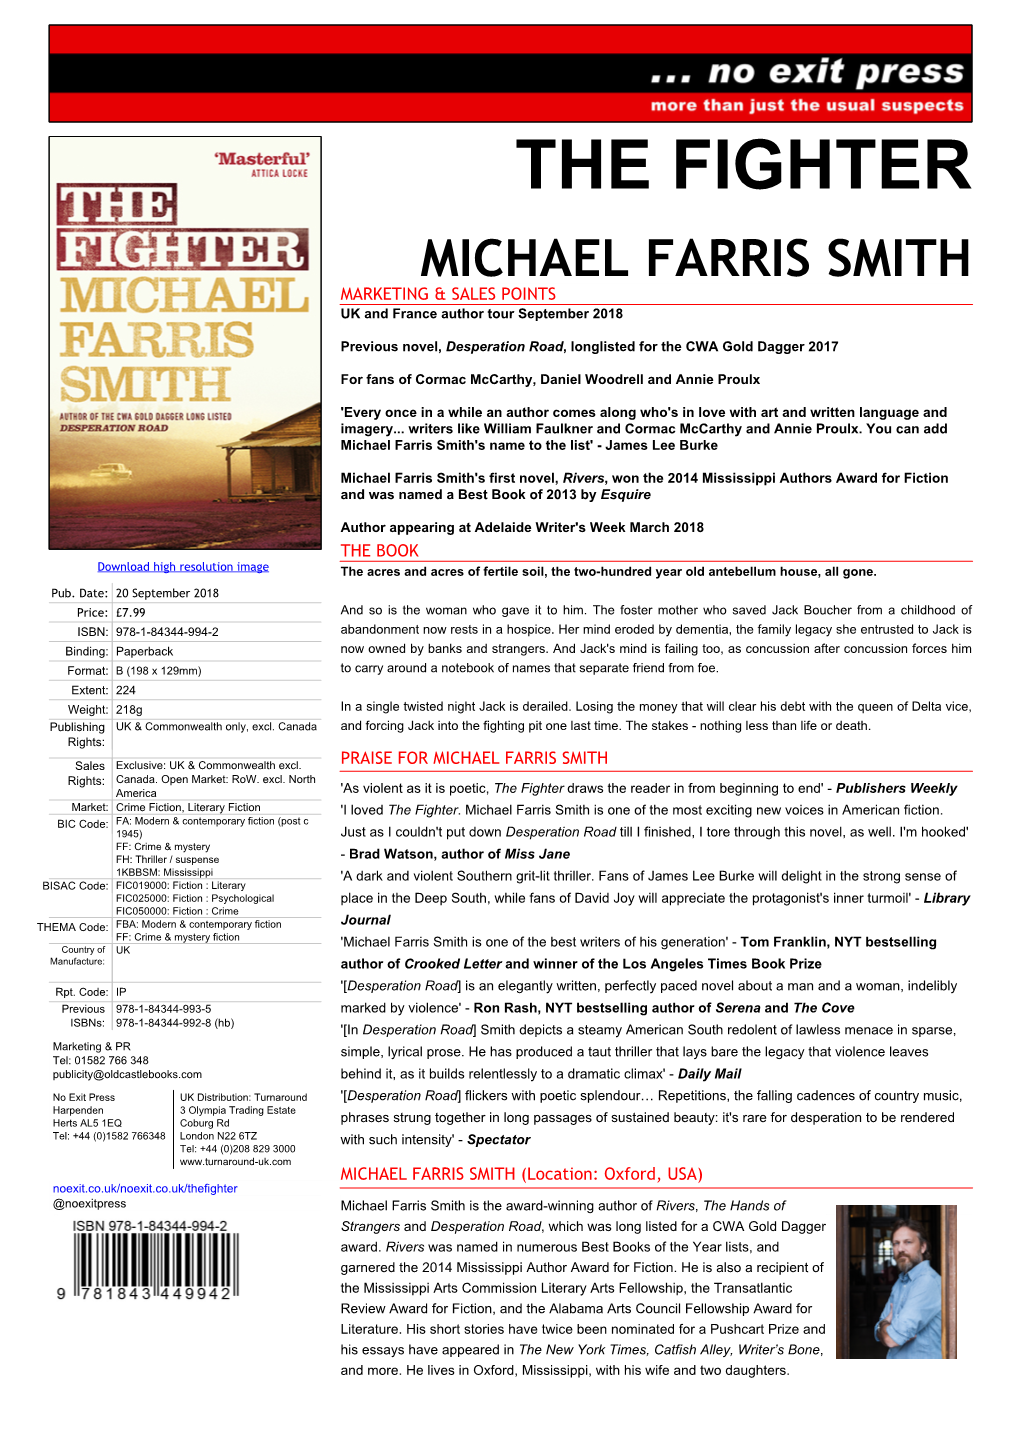 THE FIGHTER MICHAEL FARRIS SMITH MARKETING & SALES POINTS UK and France Author Tour September 2018